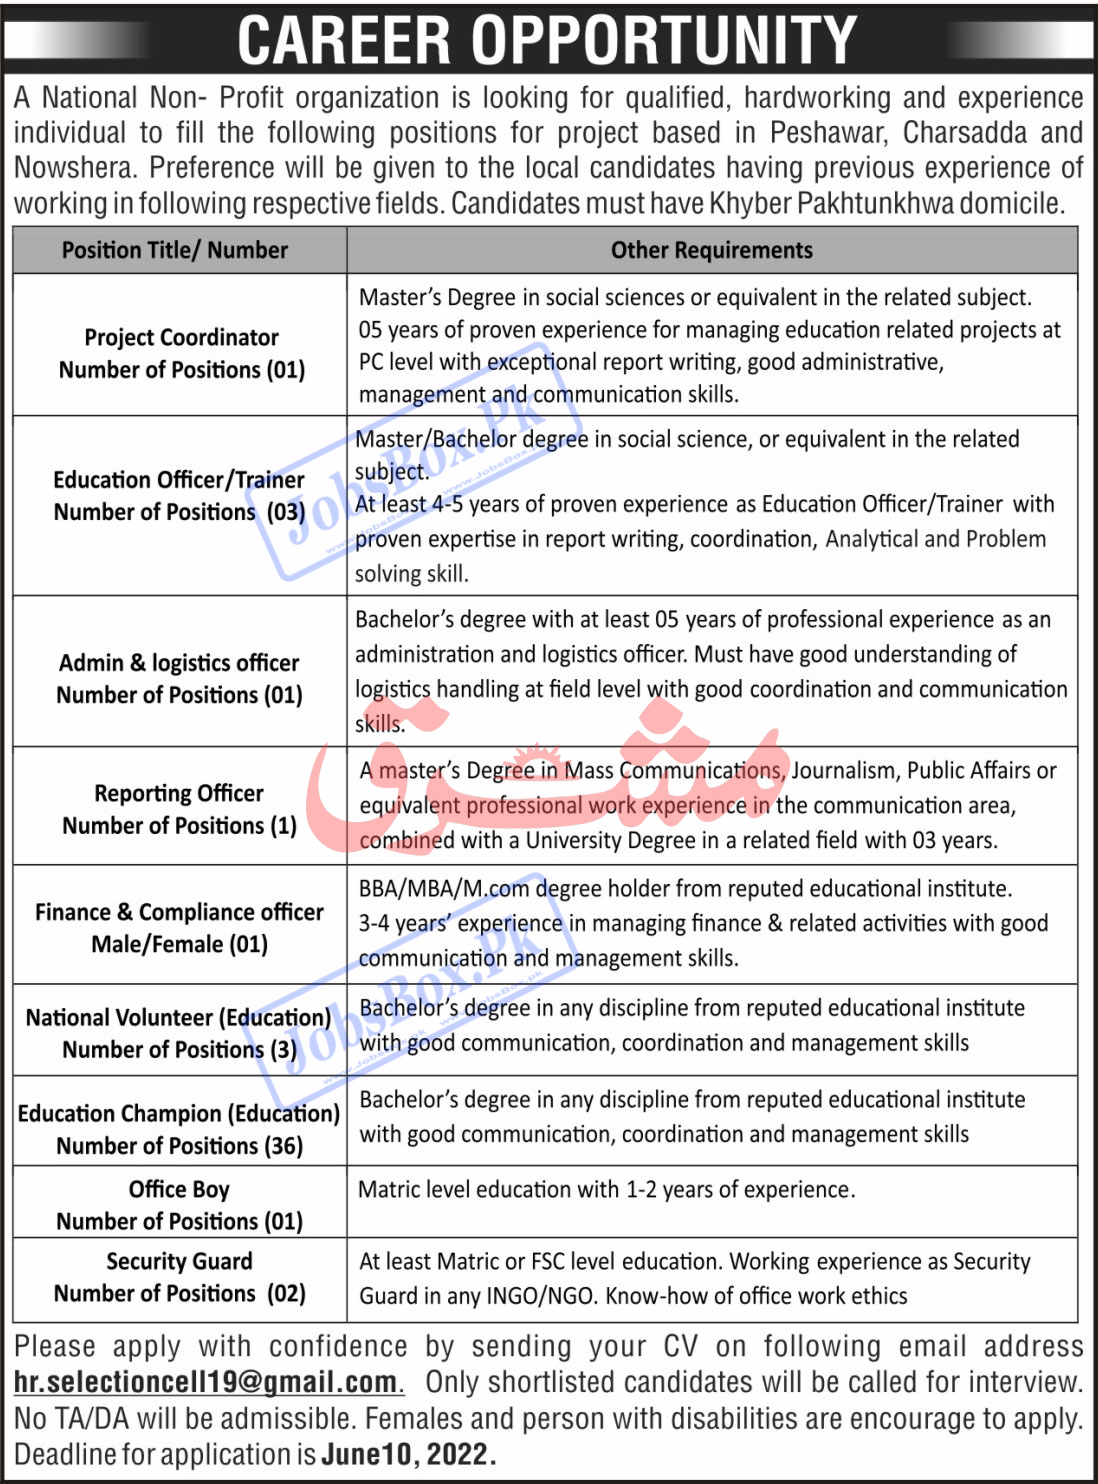 National Organization Education Project Jobs 2022 - hr.selectioncell19@gmail.com Jobs 2022